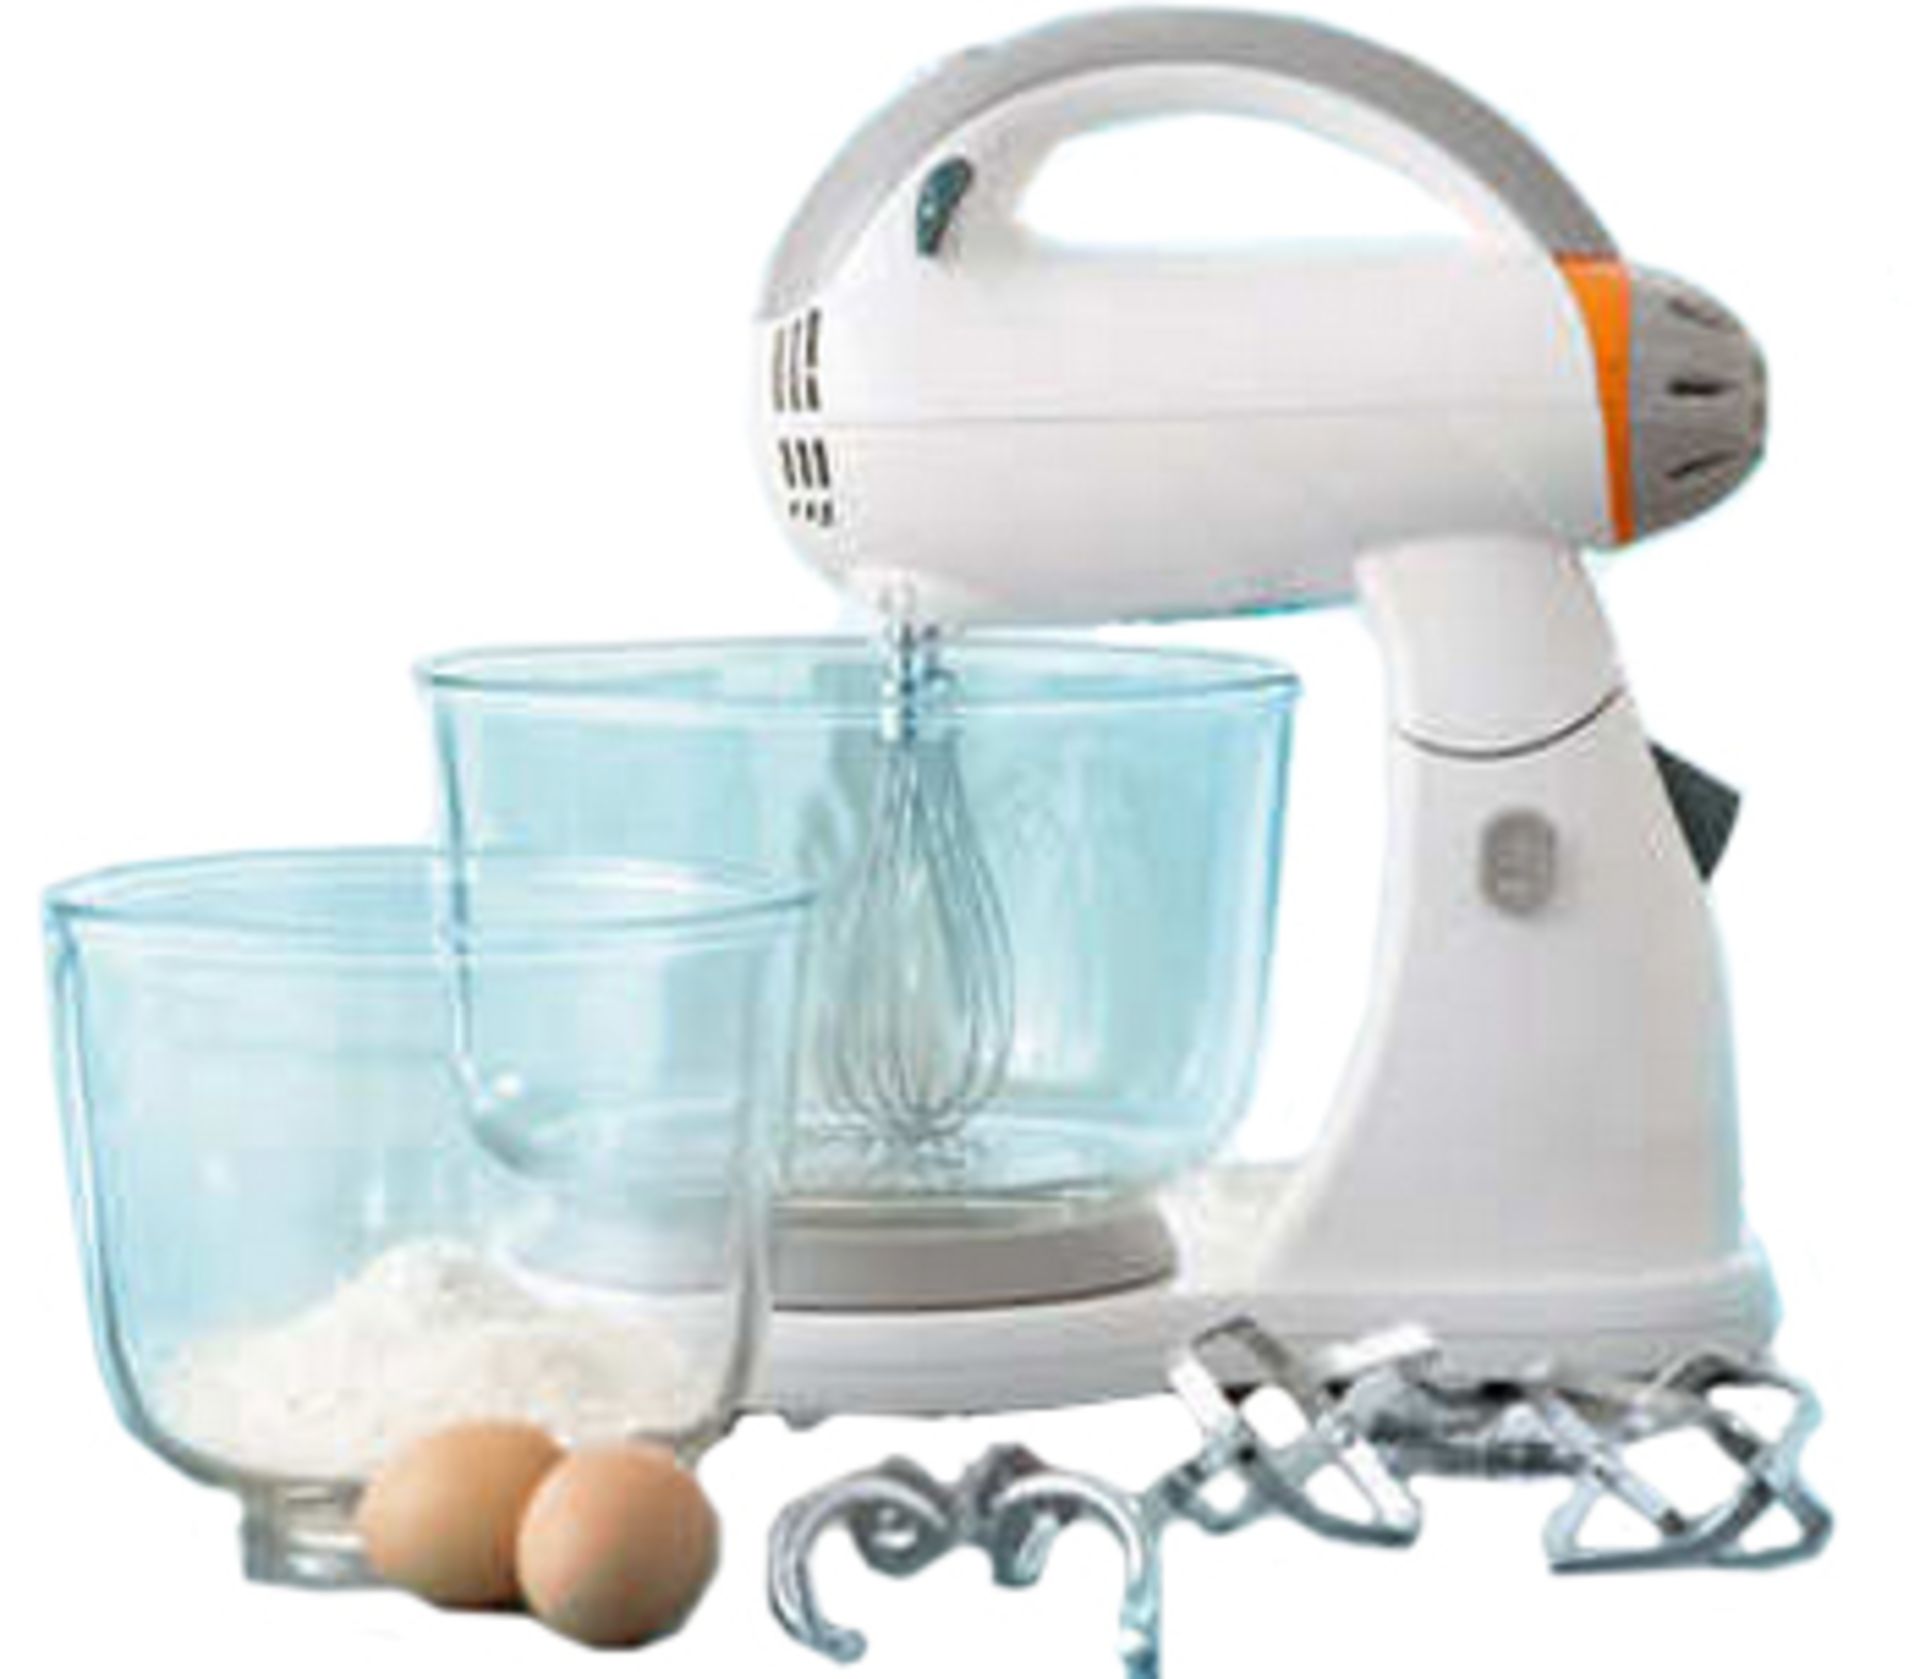 V Brand New Classic Food Mixer-Continuous Speed Setting-Turbo Function With Safety Switch-Brushed